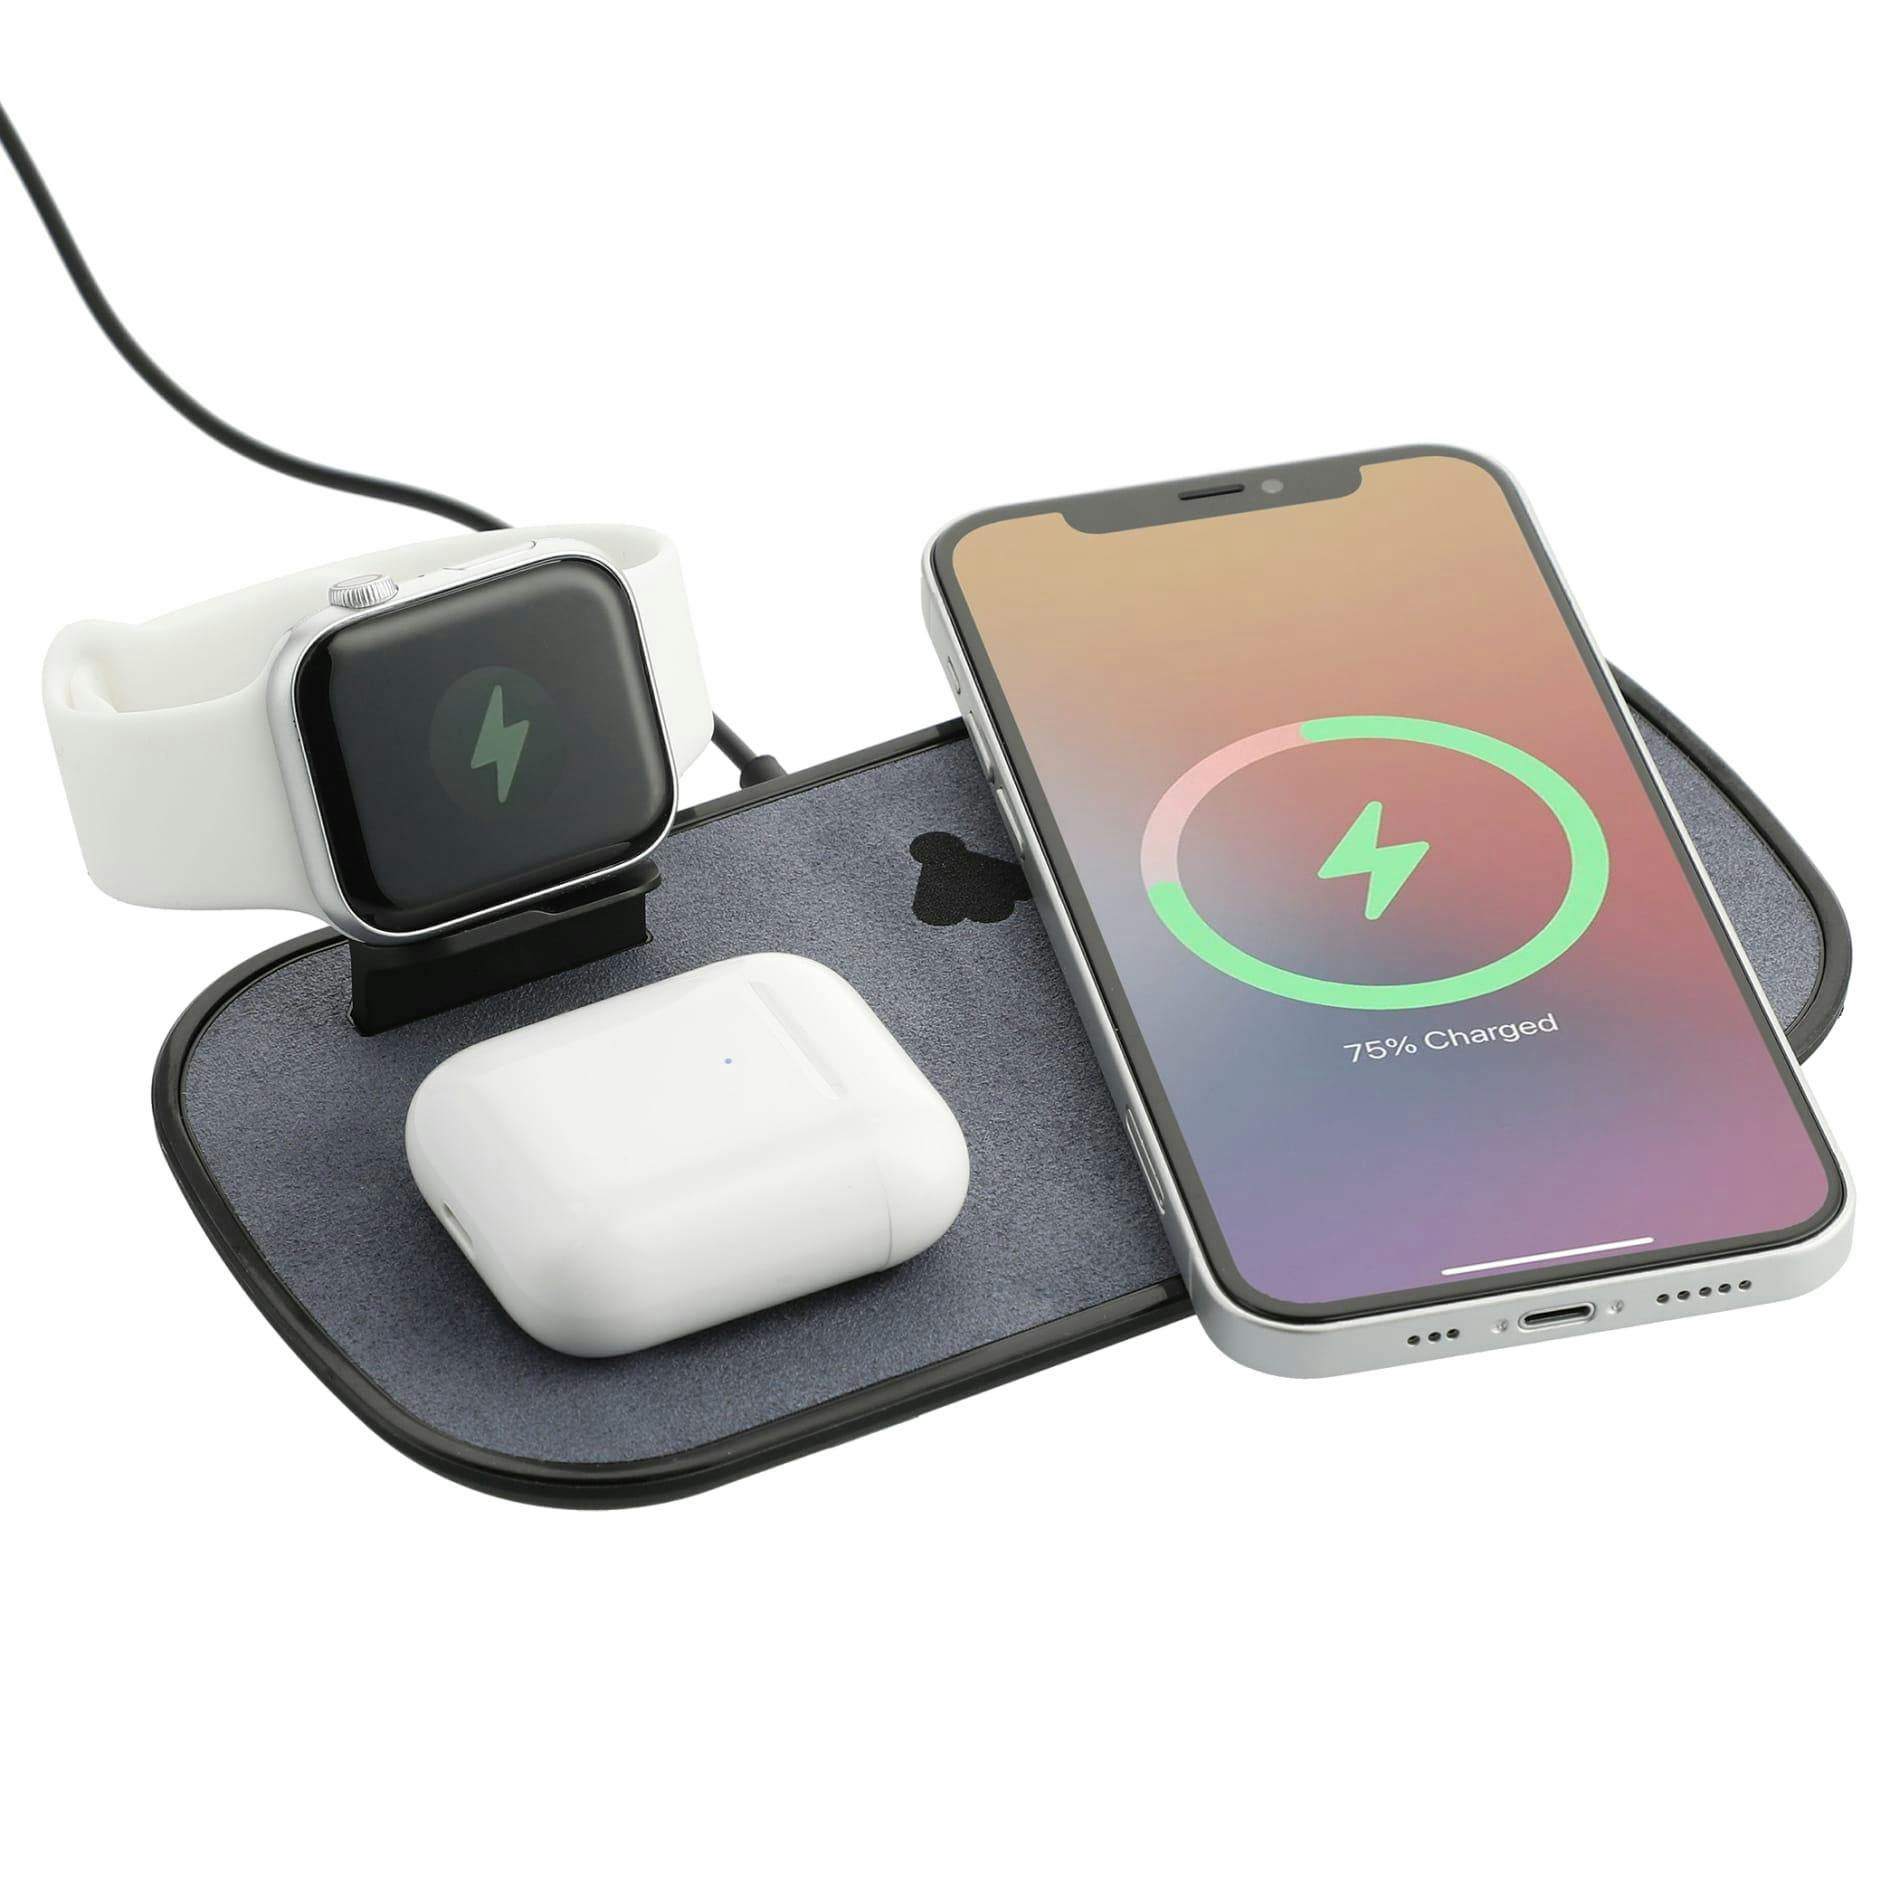 mophie® 3-in-1 Fabric Wireless Charging Pad - additional Image 5